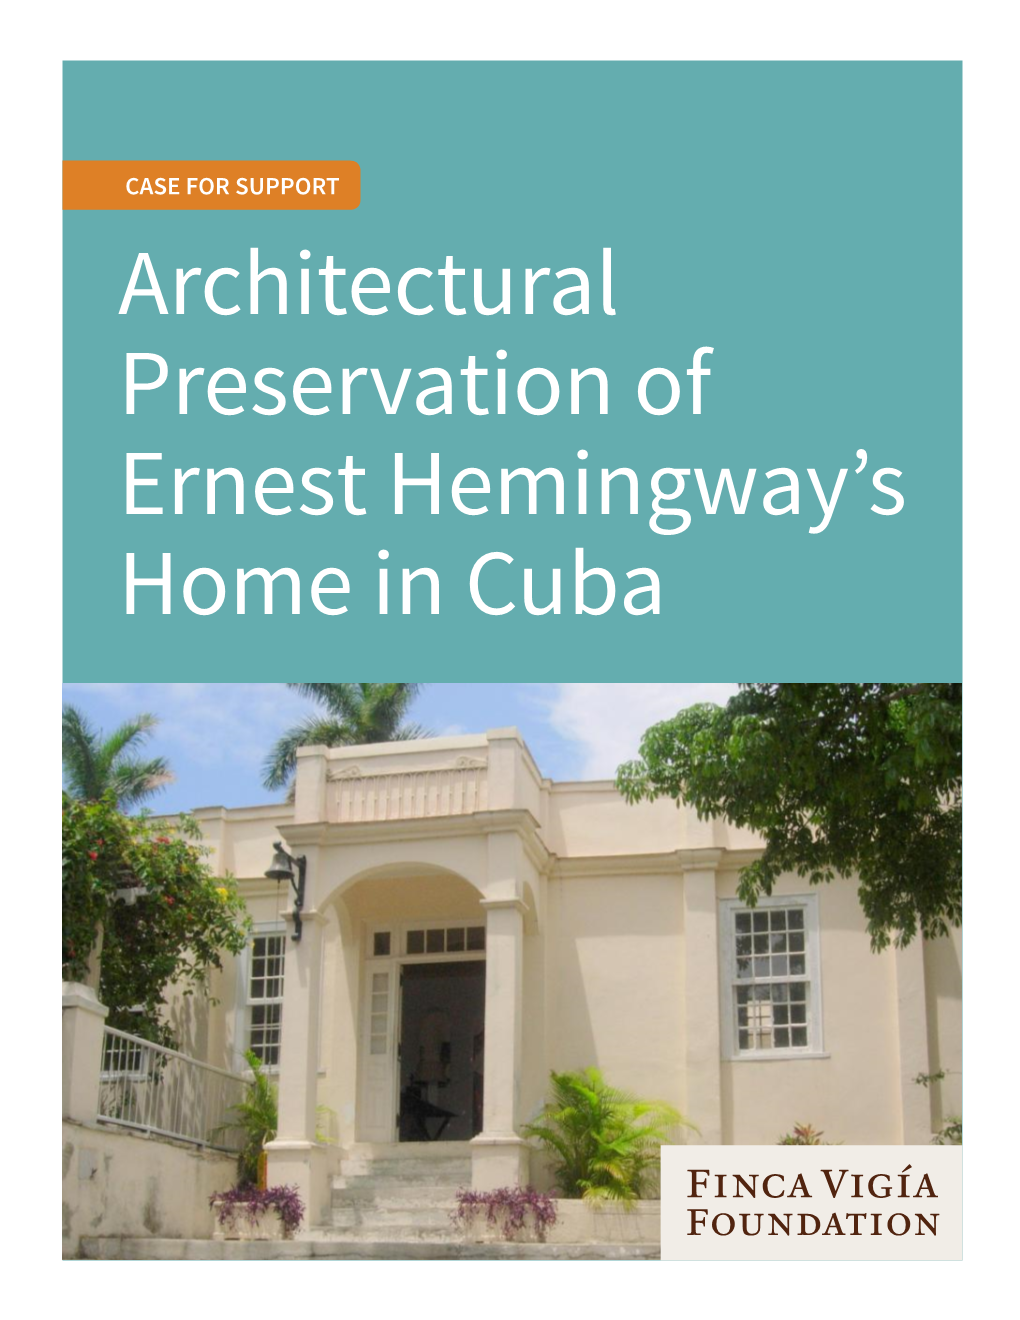 Architectural Preservation of Ernest Hemingway's Home in Cuba